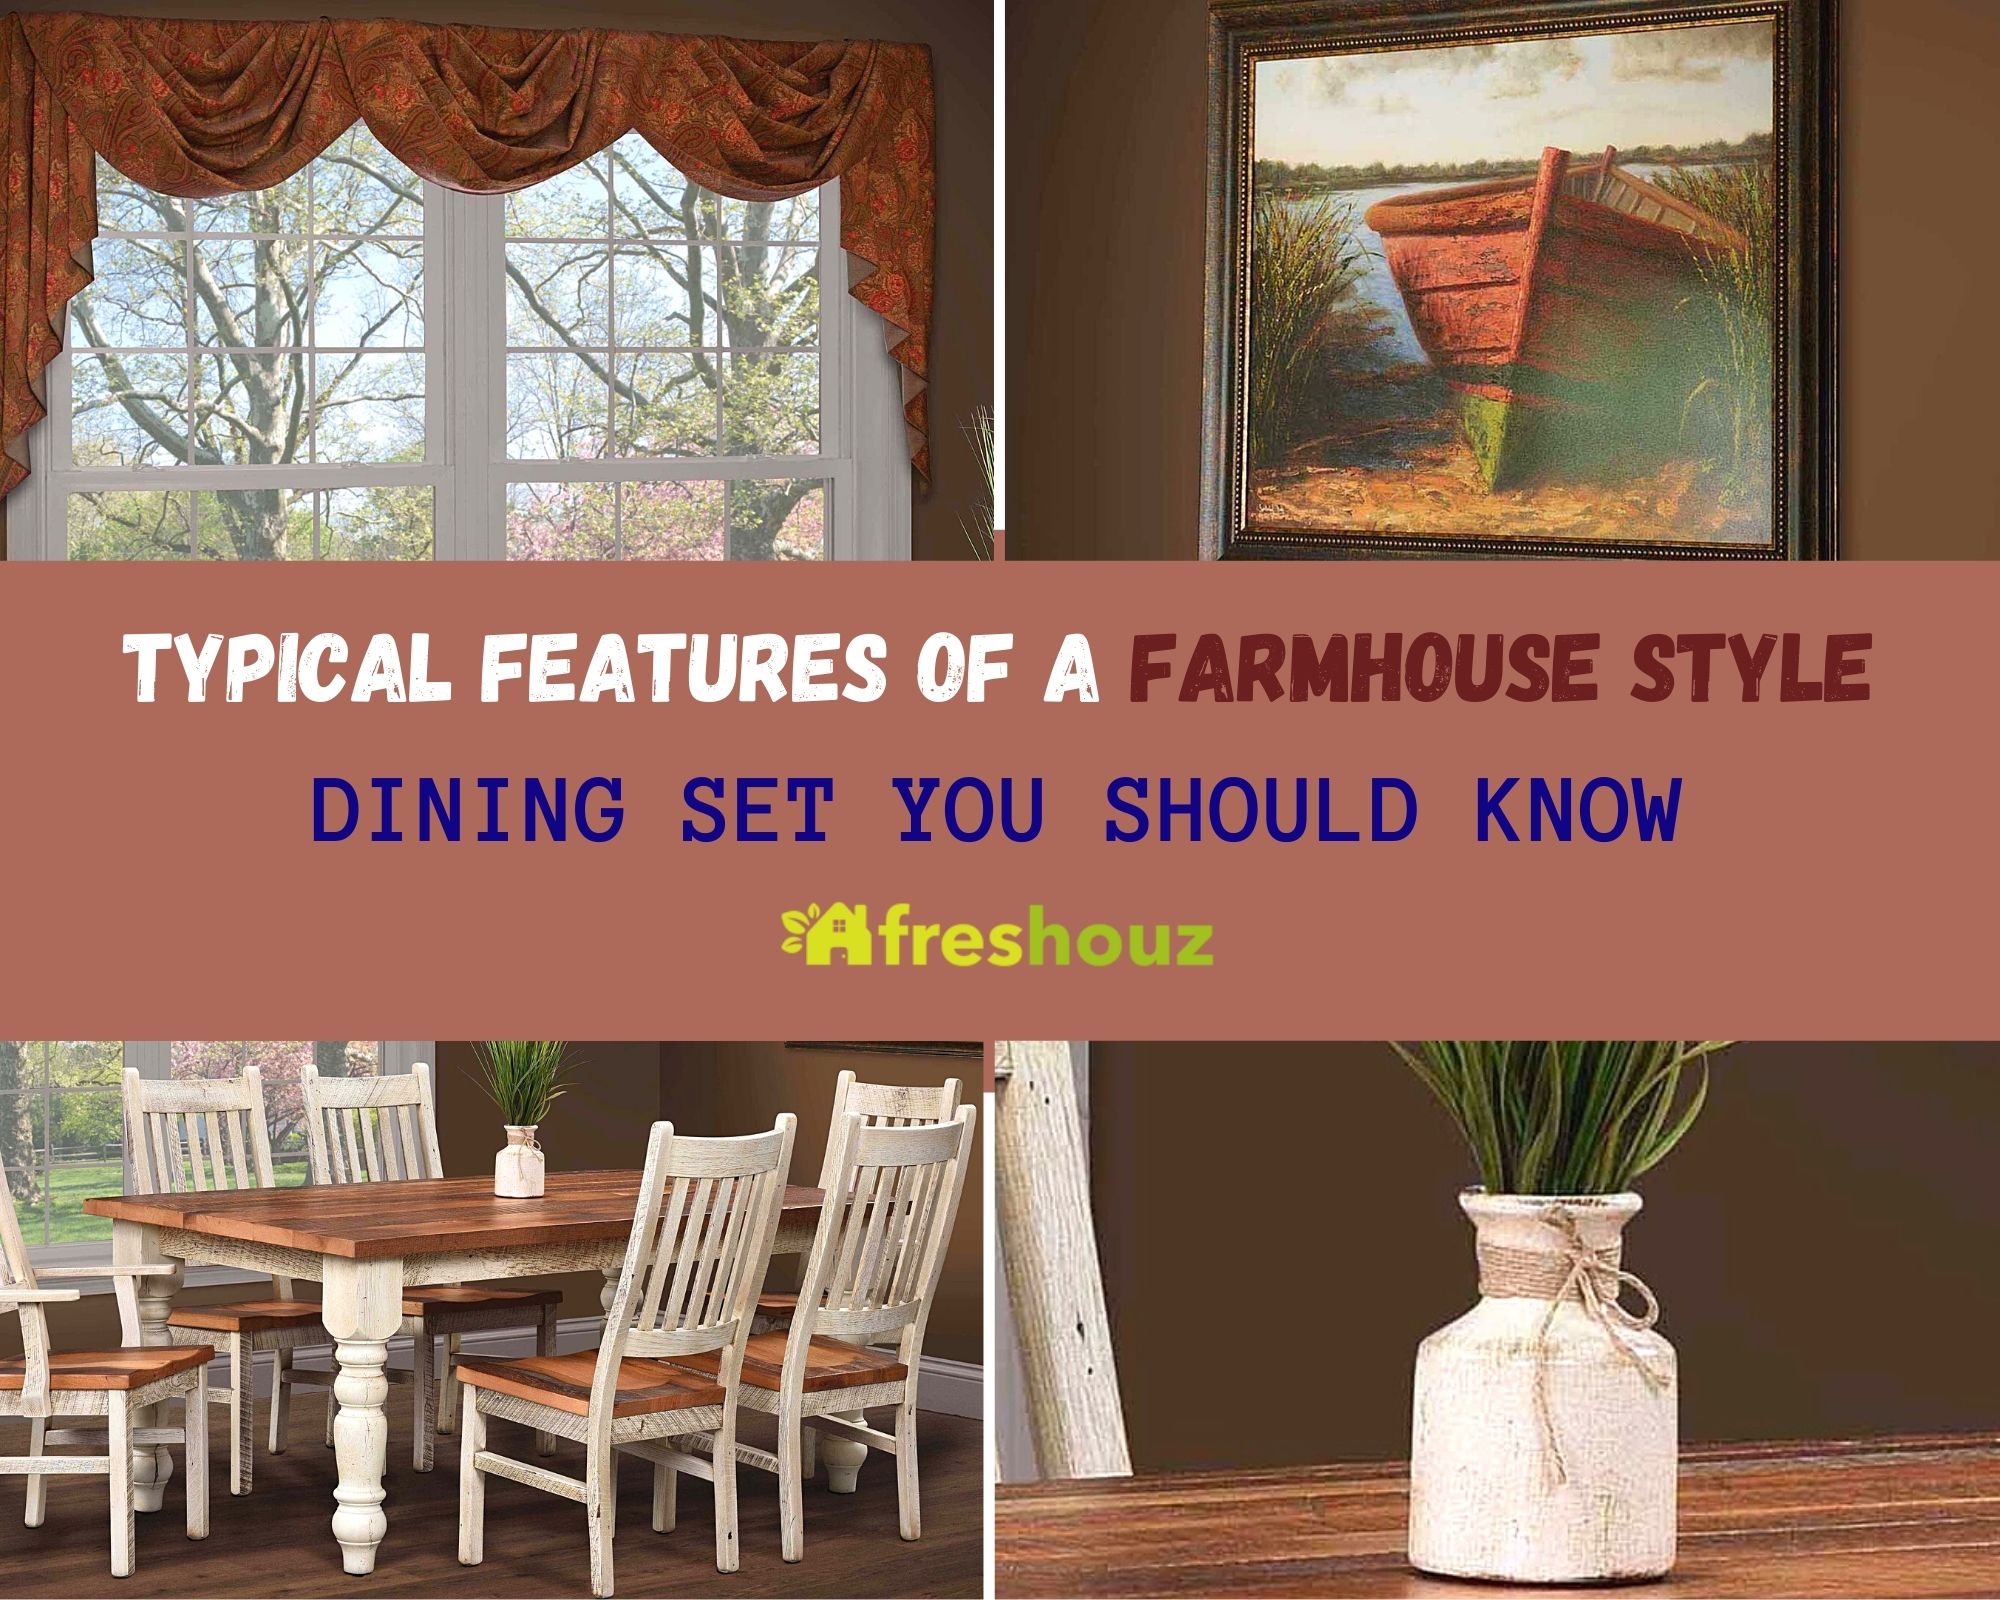 Typical Features Of A Farmhouse Style Dining Set You Should Know